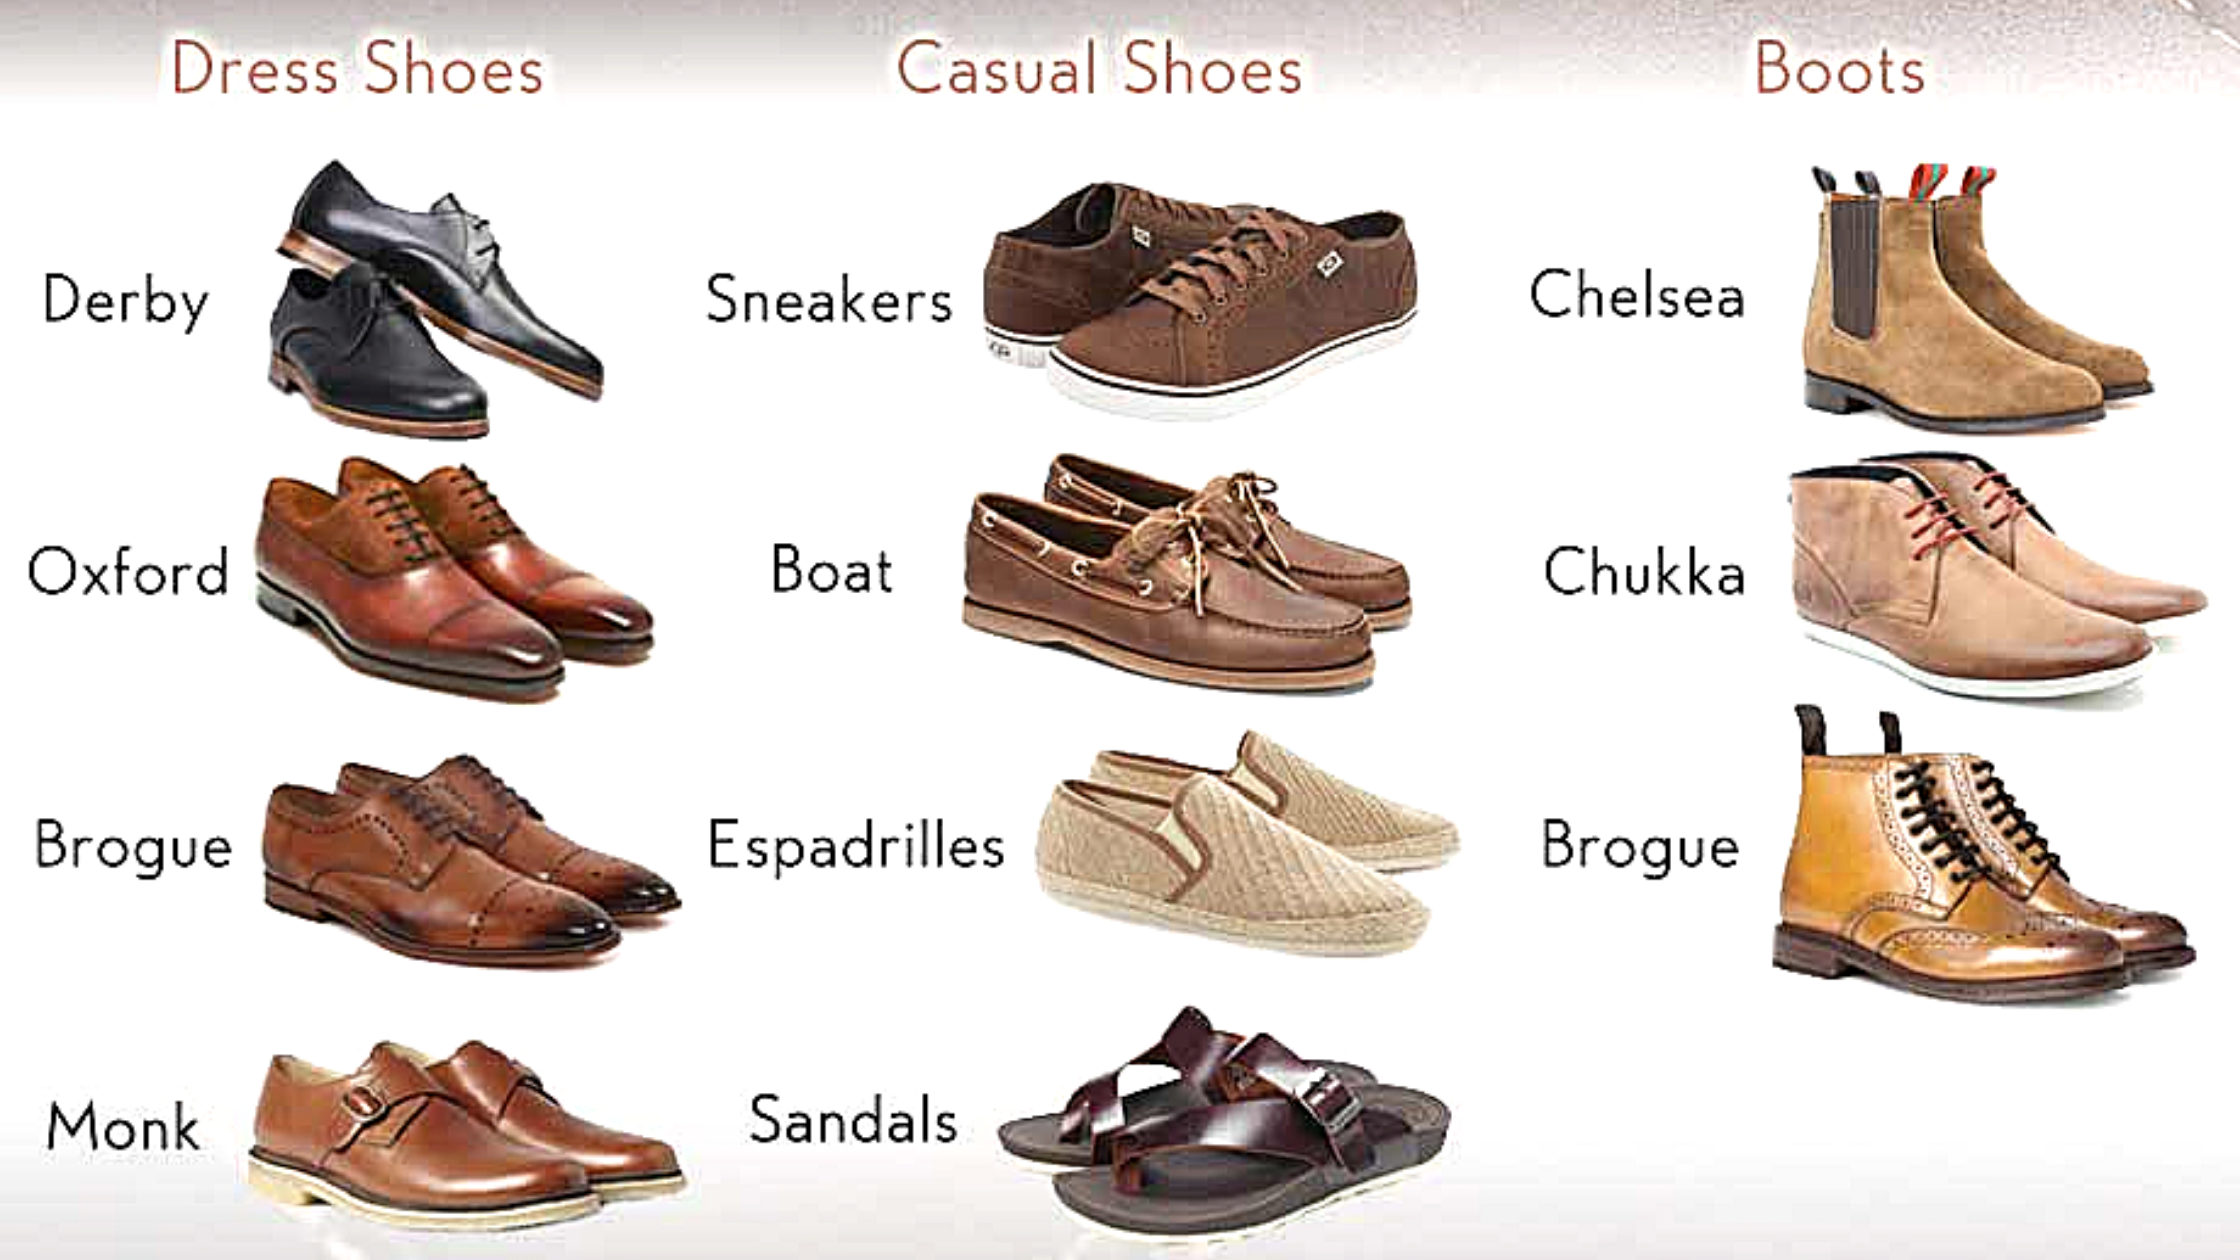 What kind of shoes do you need for your daily routine?